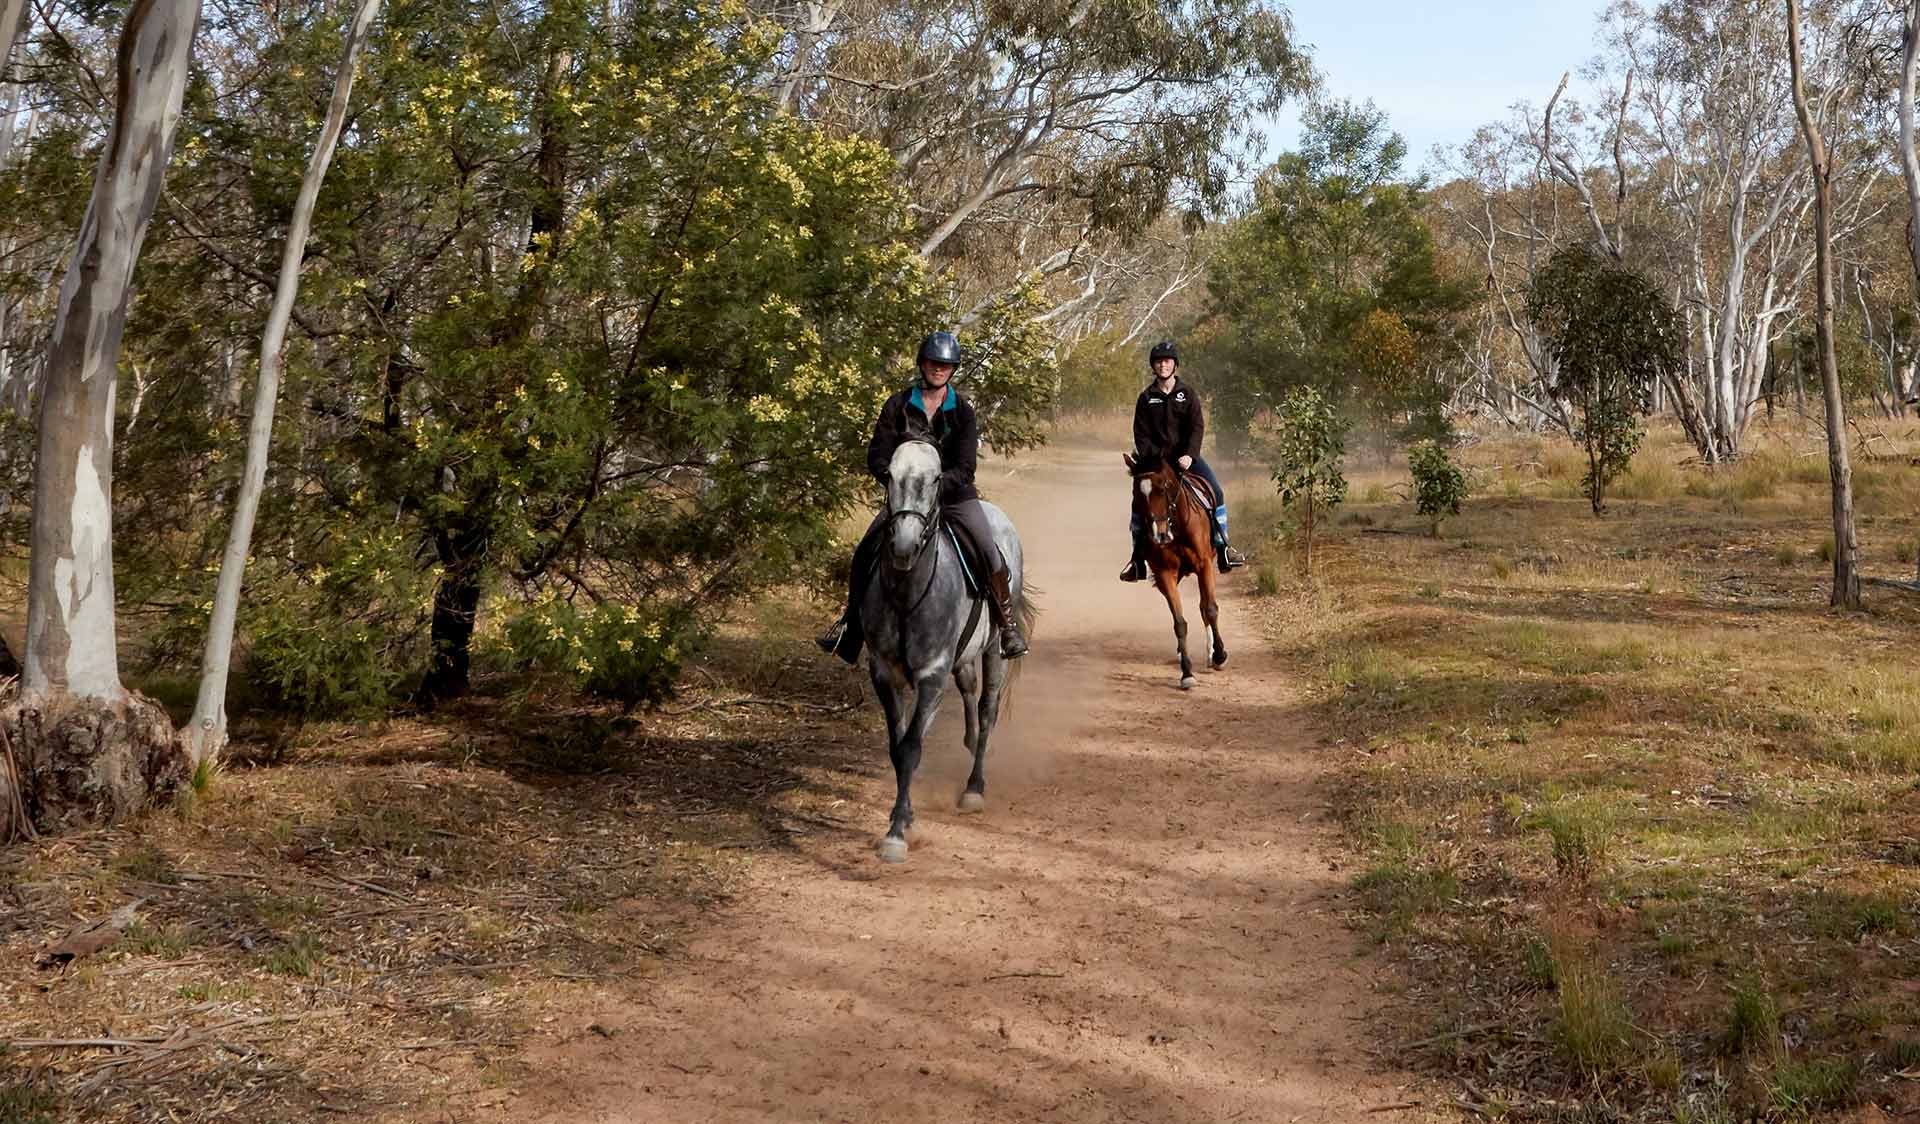 Two women ride horses along a dirt path in the You Yangs Regional Park.